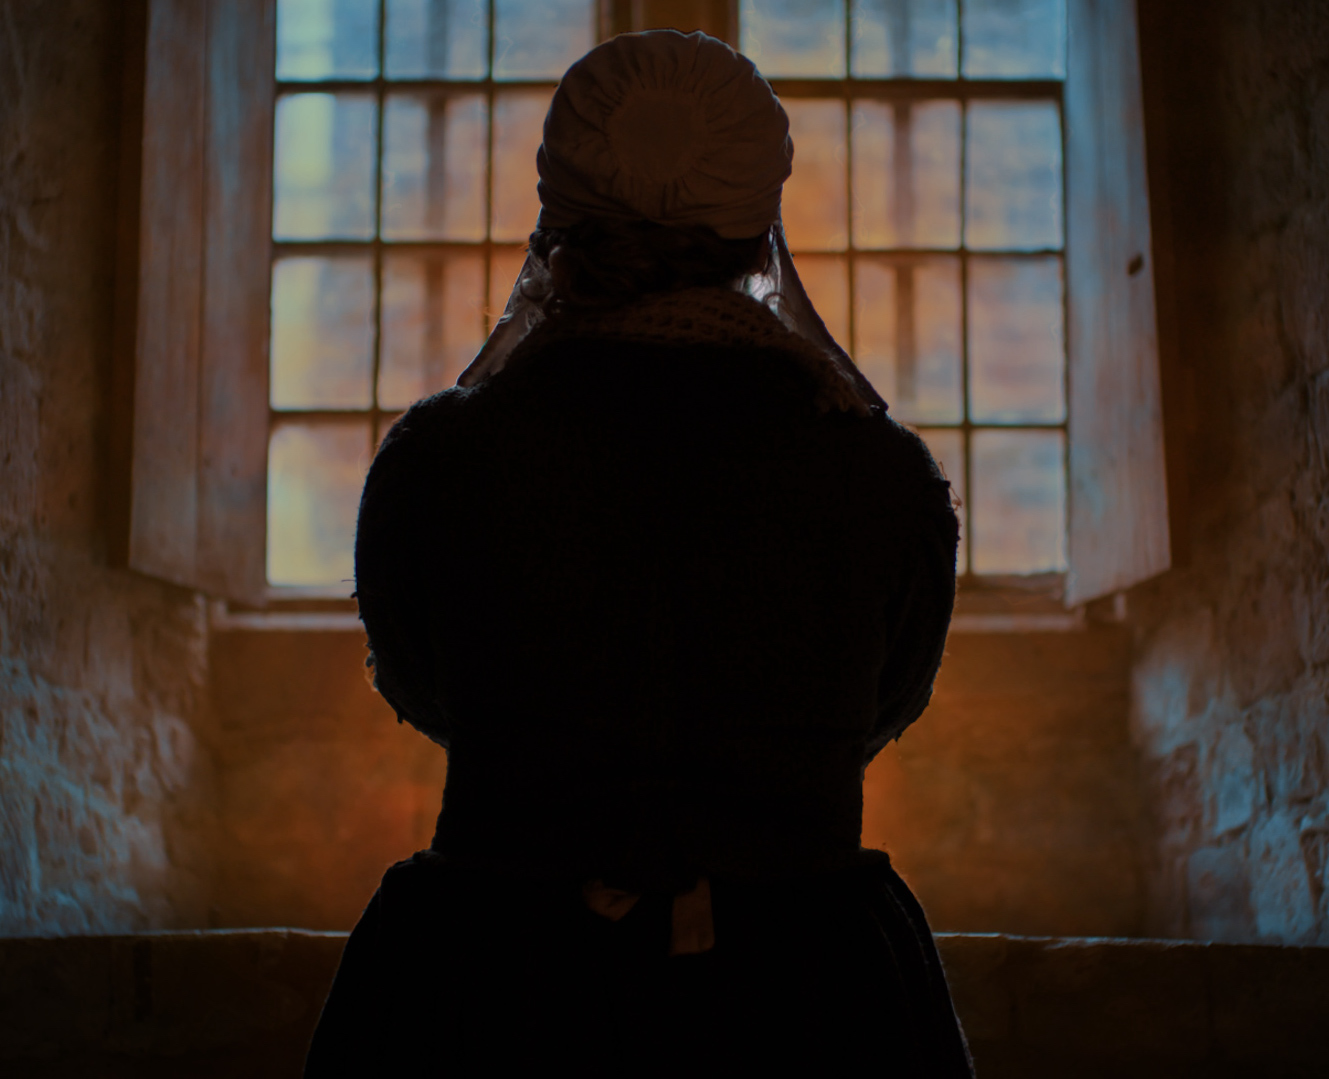 a woman in 17th century dress prays at a window